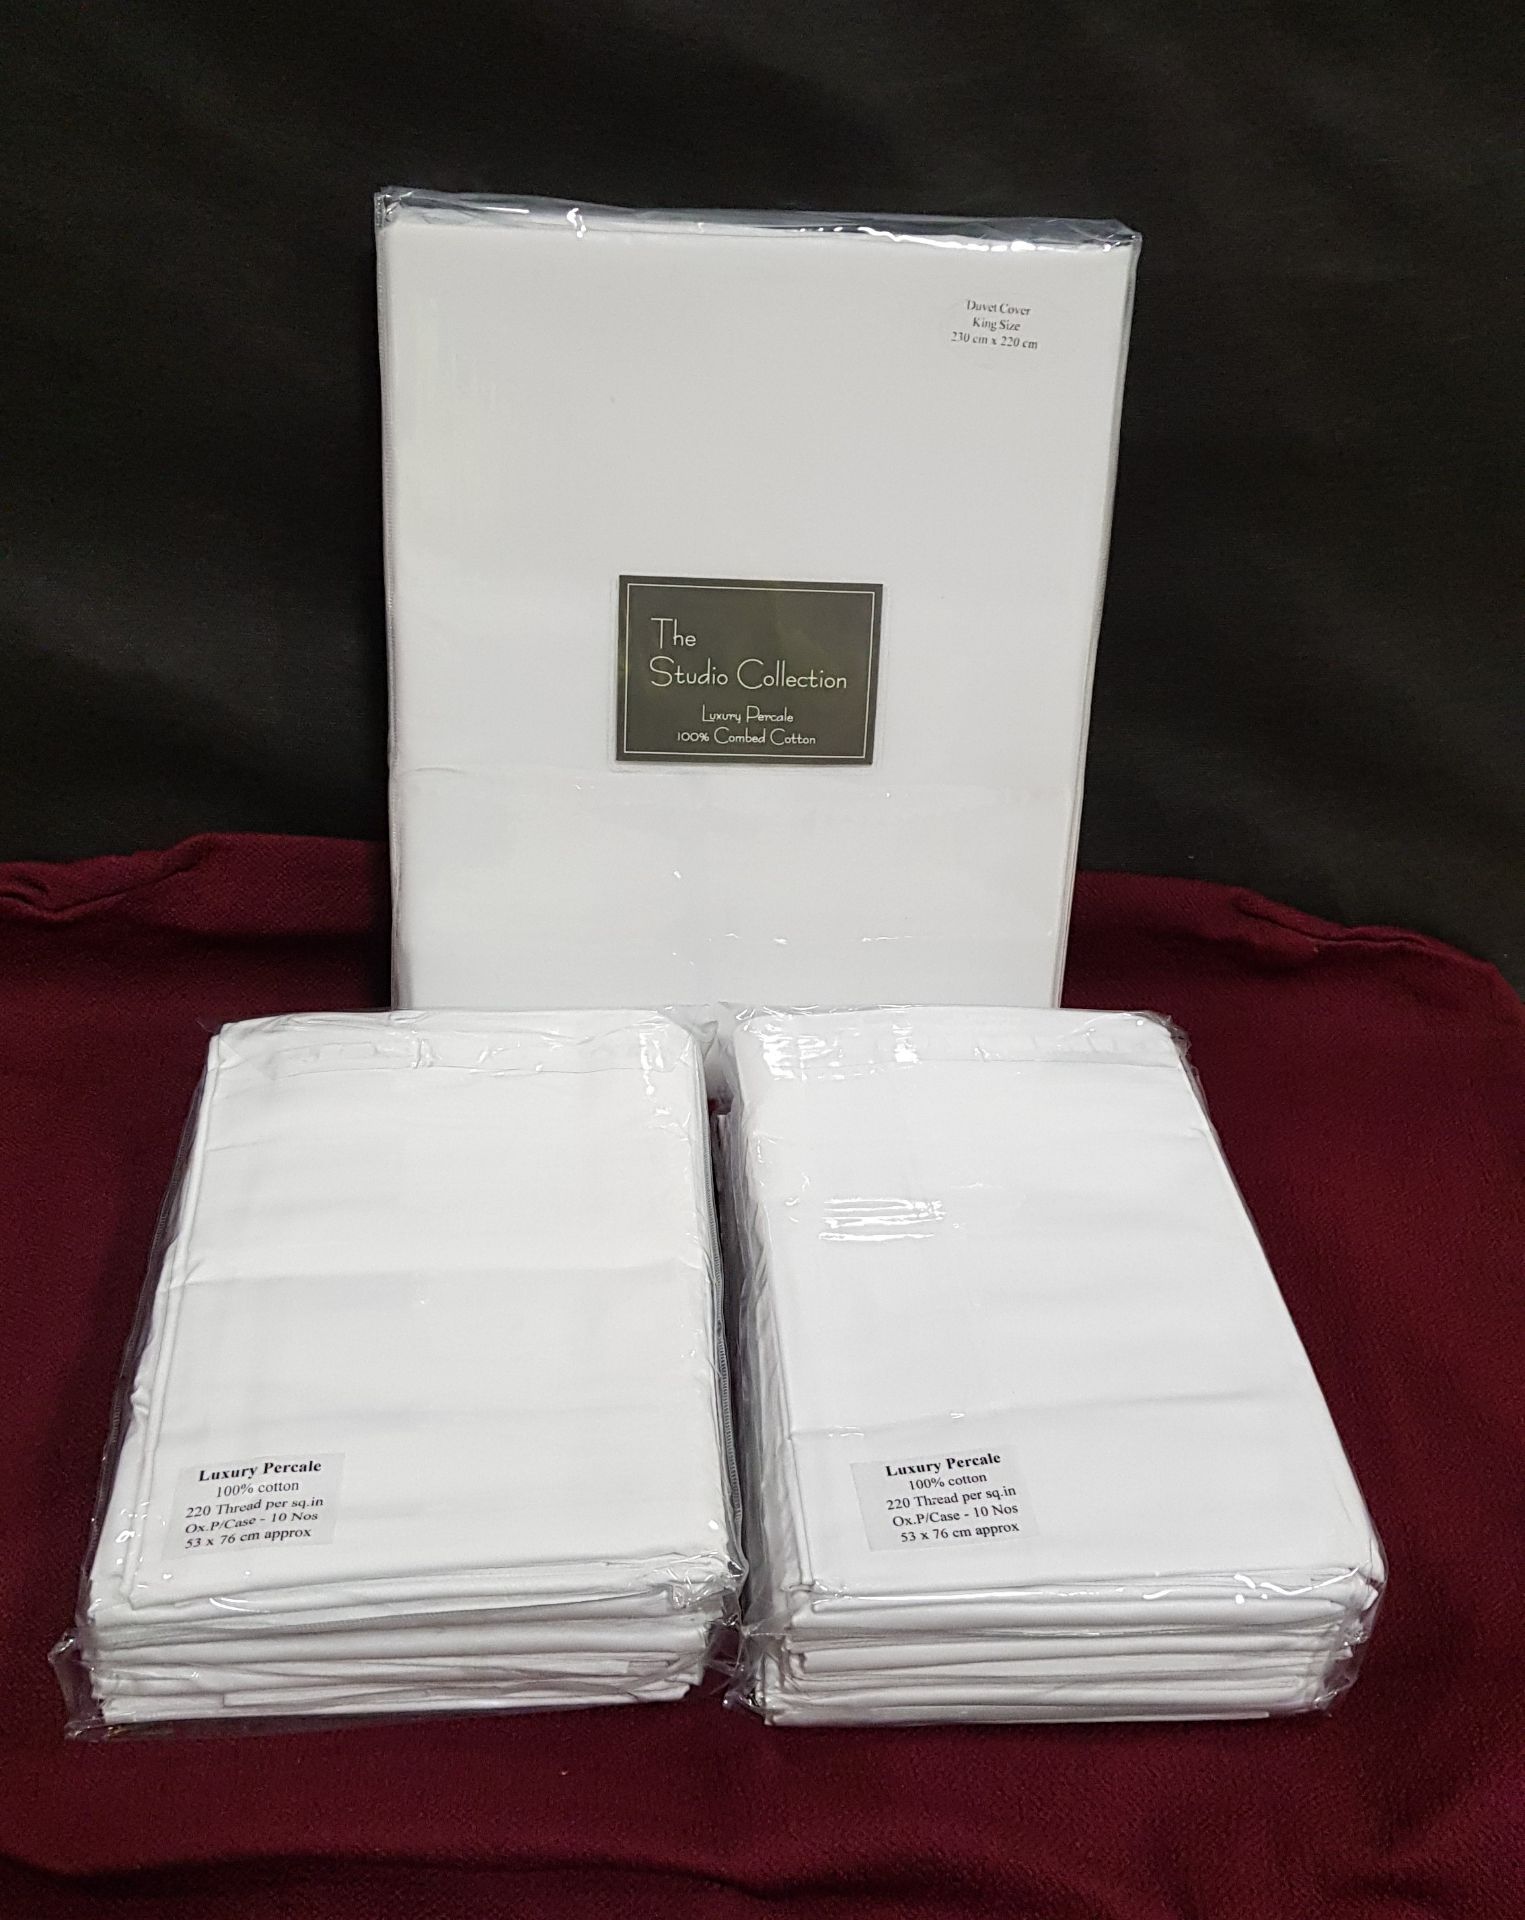 72 X PIECE MIXED STUDIO COLLECTION BRAND NEW BEDDING LOT CONTAINING - 22X LUXURY PERCALE 100% COTTON